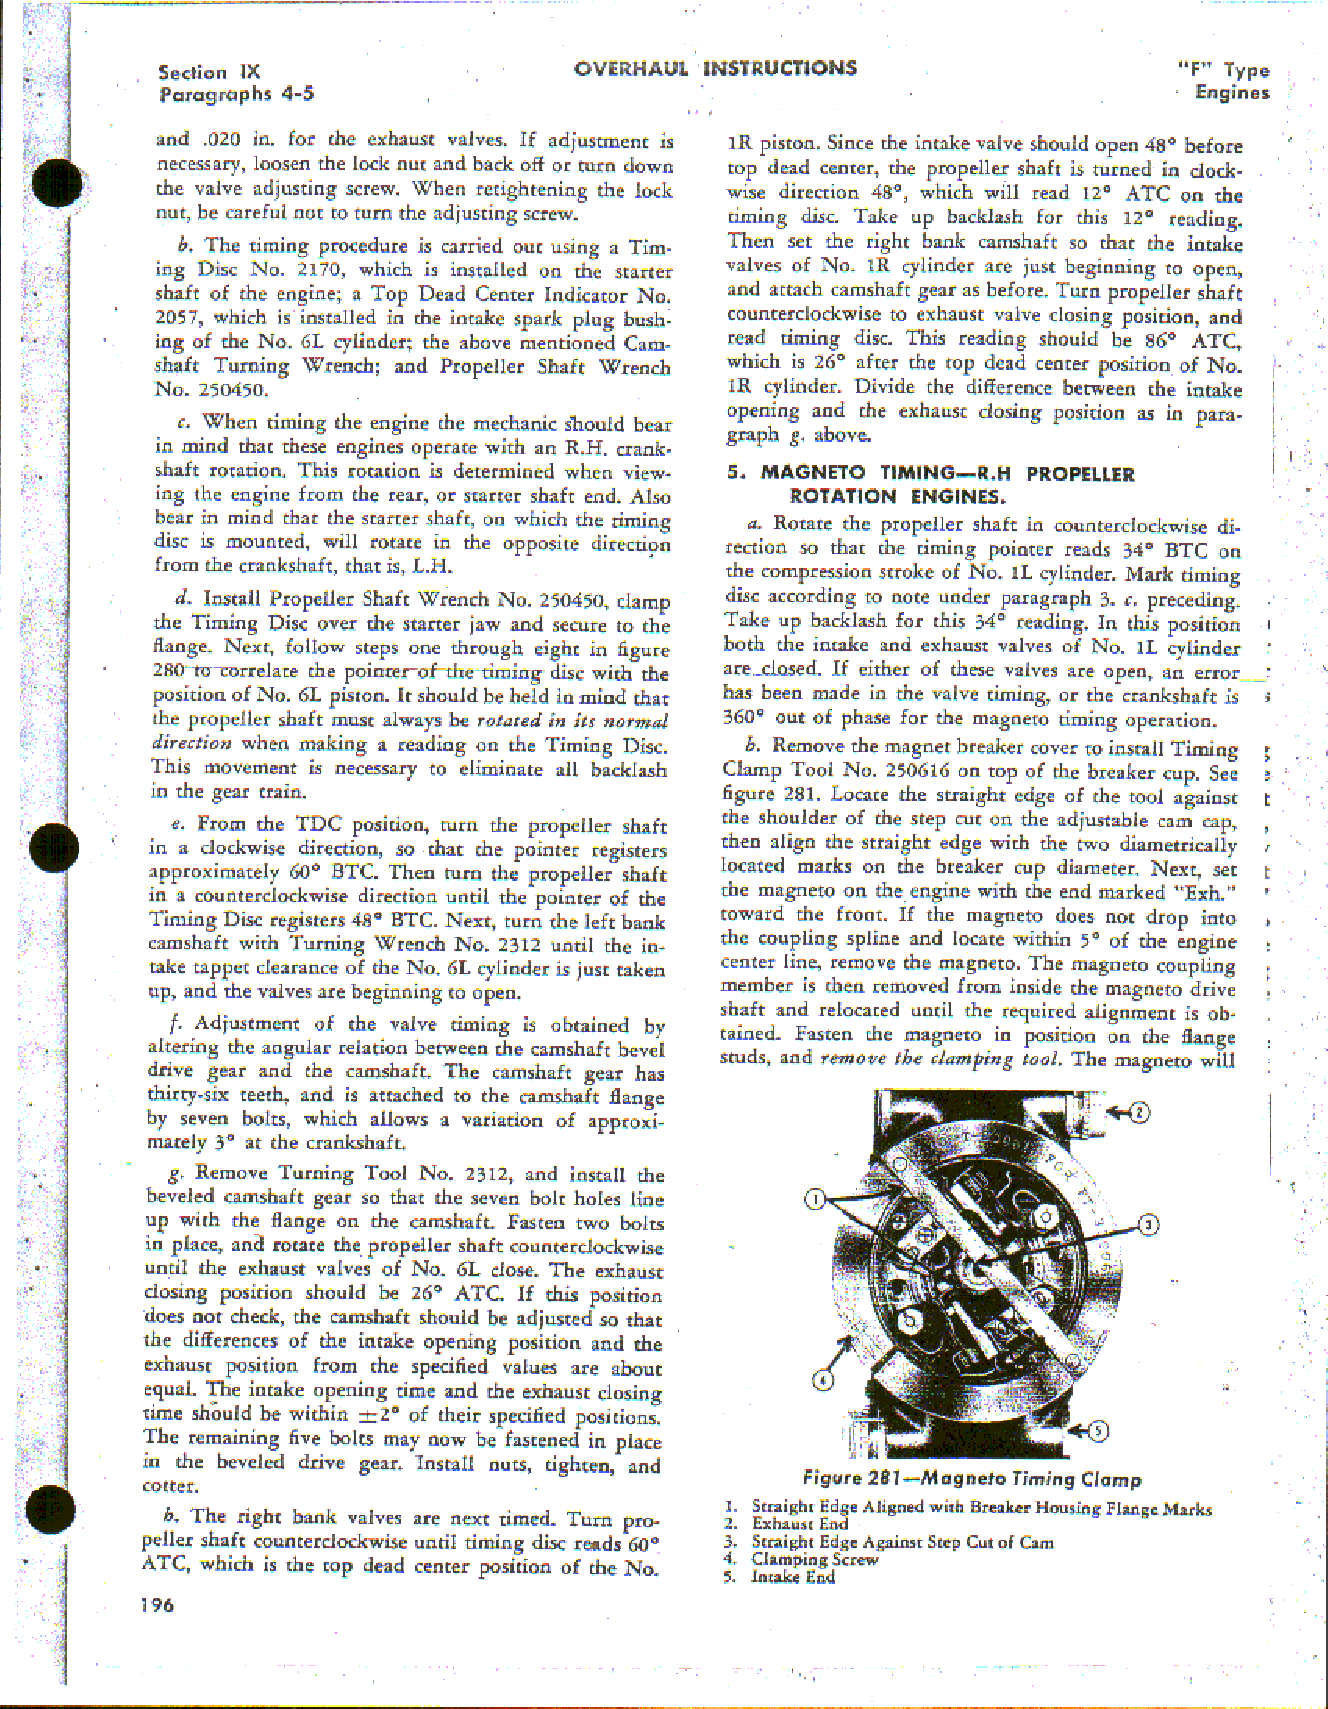 Sample page 204 from AirCorps Library document: Overhaul Bulletin - Allison Engine - V-1710-F